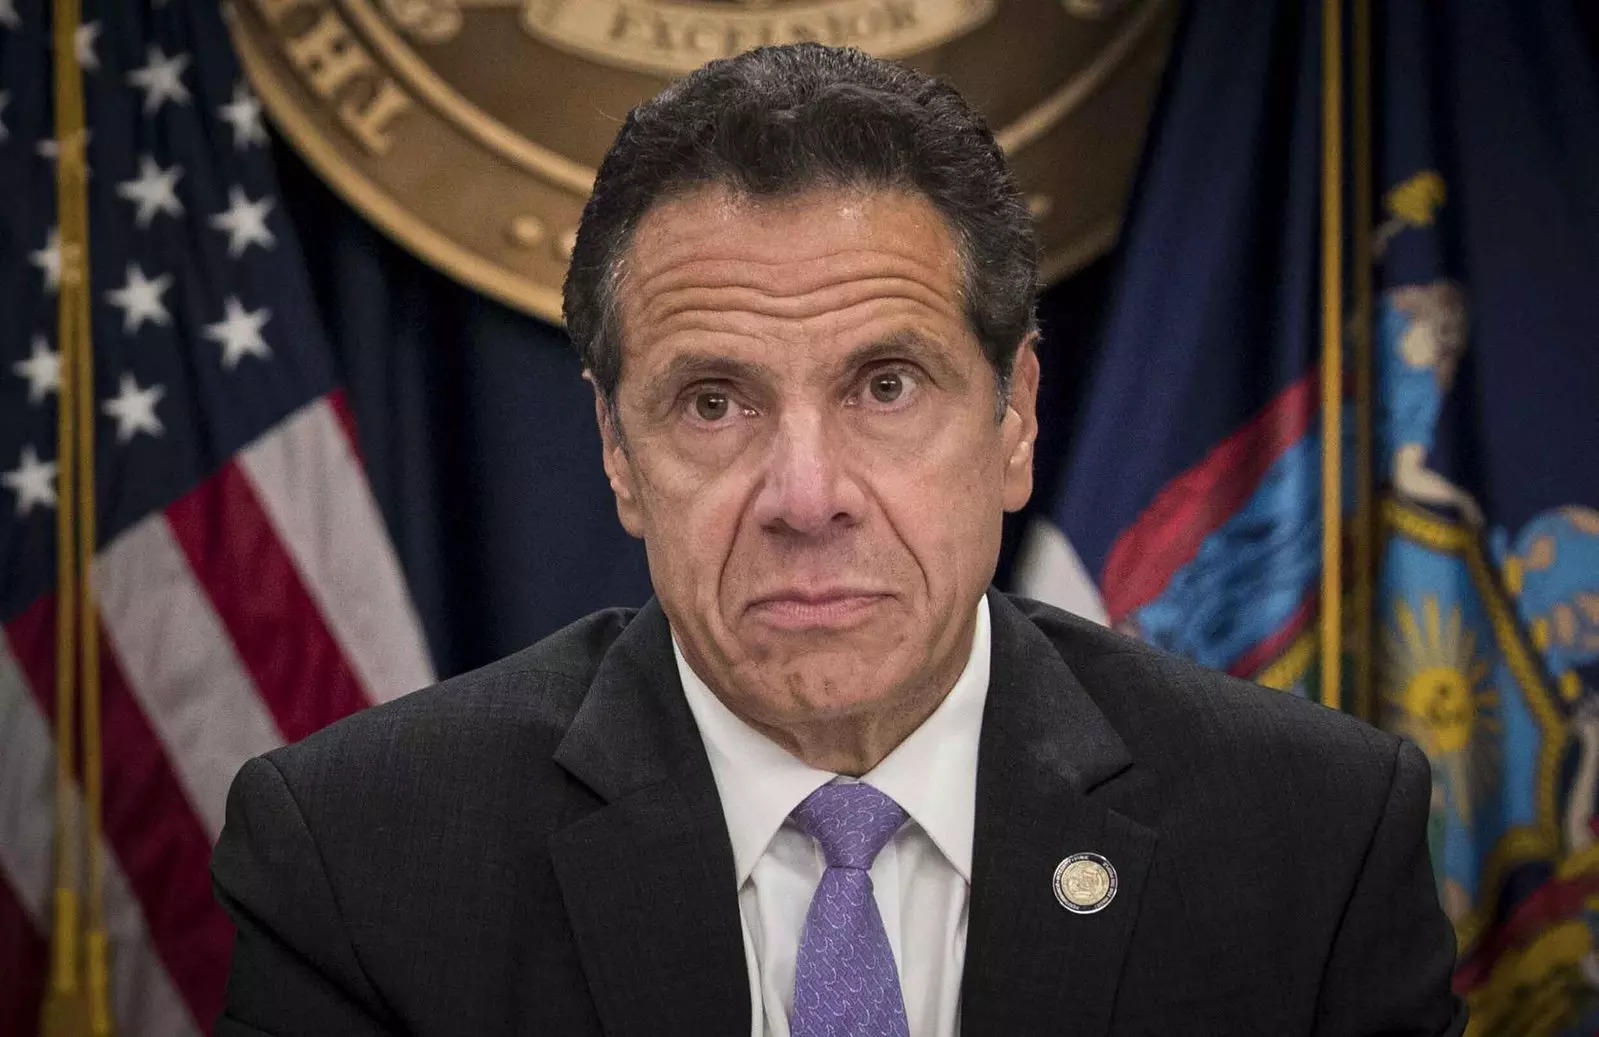 New York governor Cuomo to be questioned in sexual harassment investigation